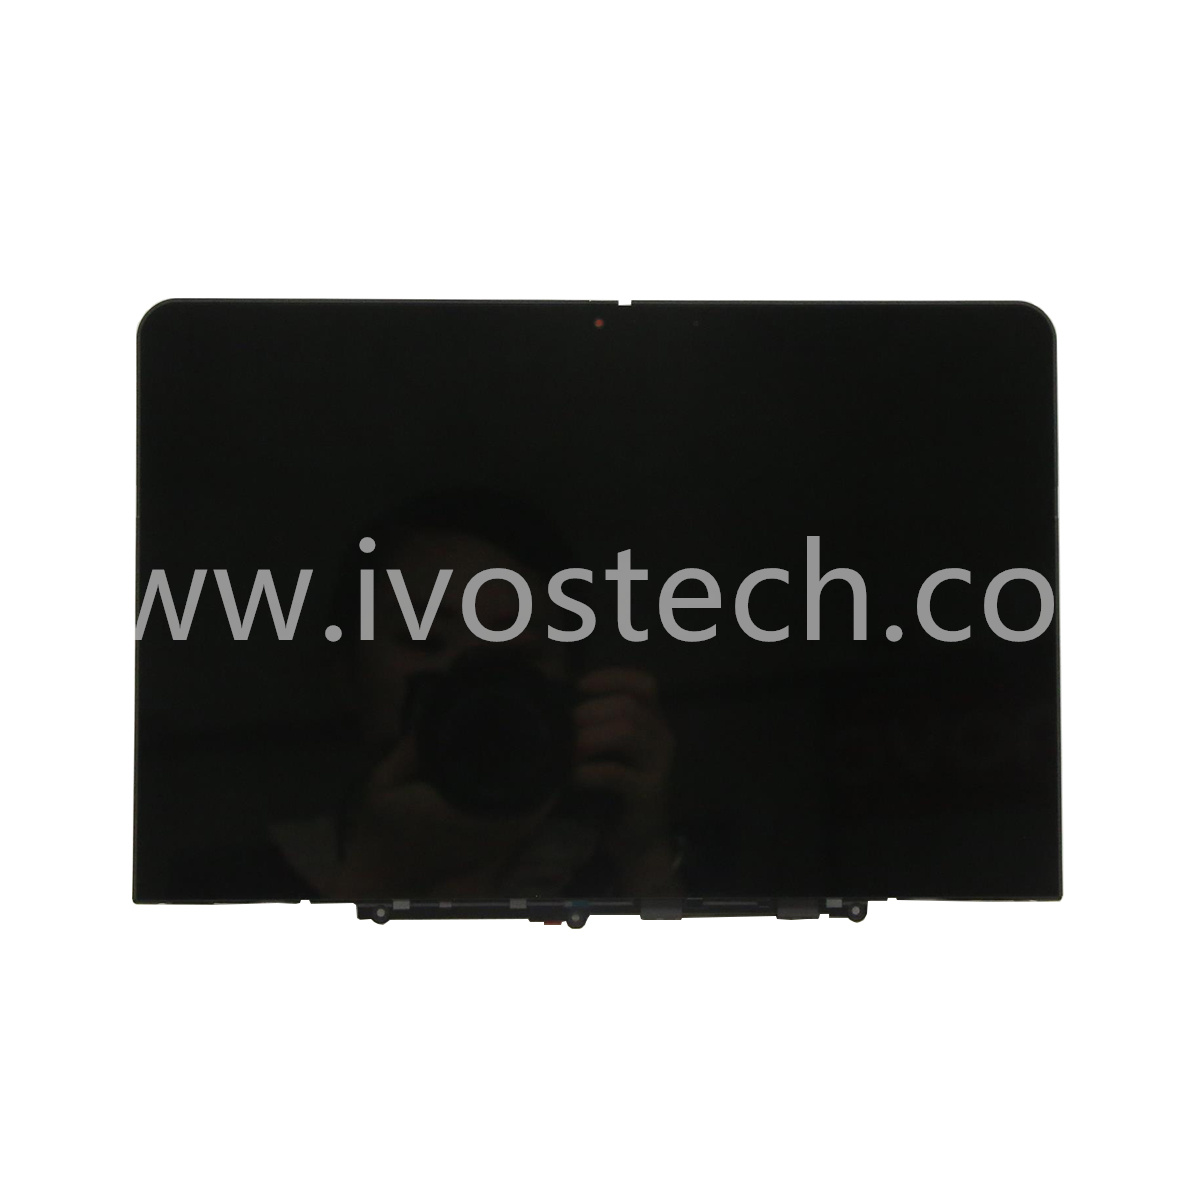 5D11C95886 11.6” HD Laptop LCD Touch Screen Display with Bezel Assembly for Lenovo Chromebook 11 500e 3rd Gen